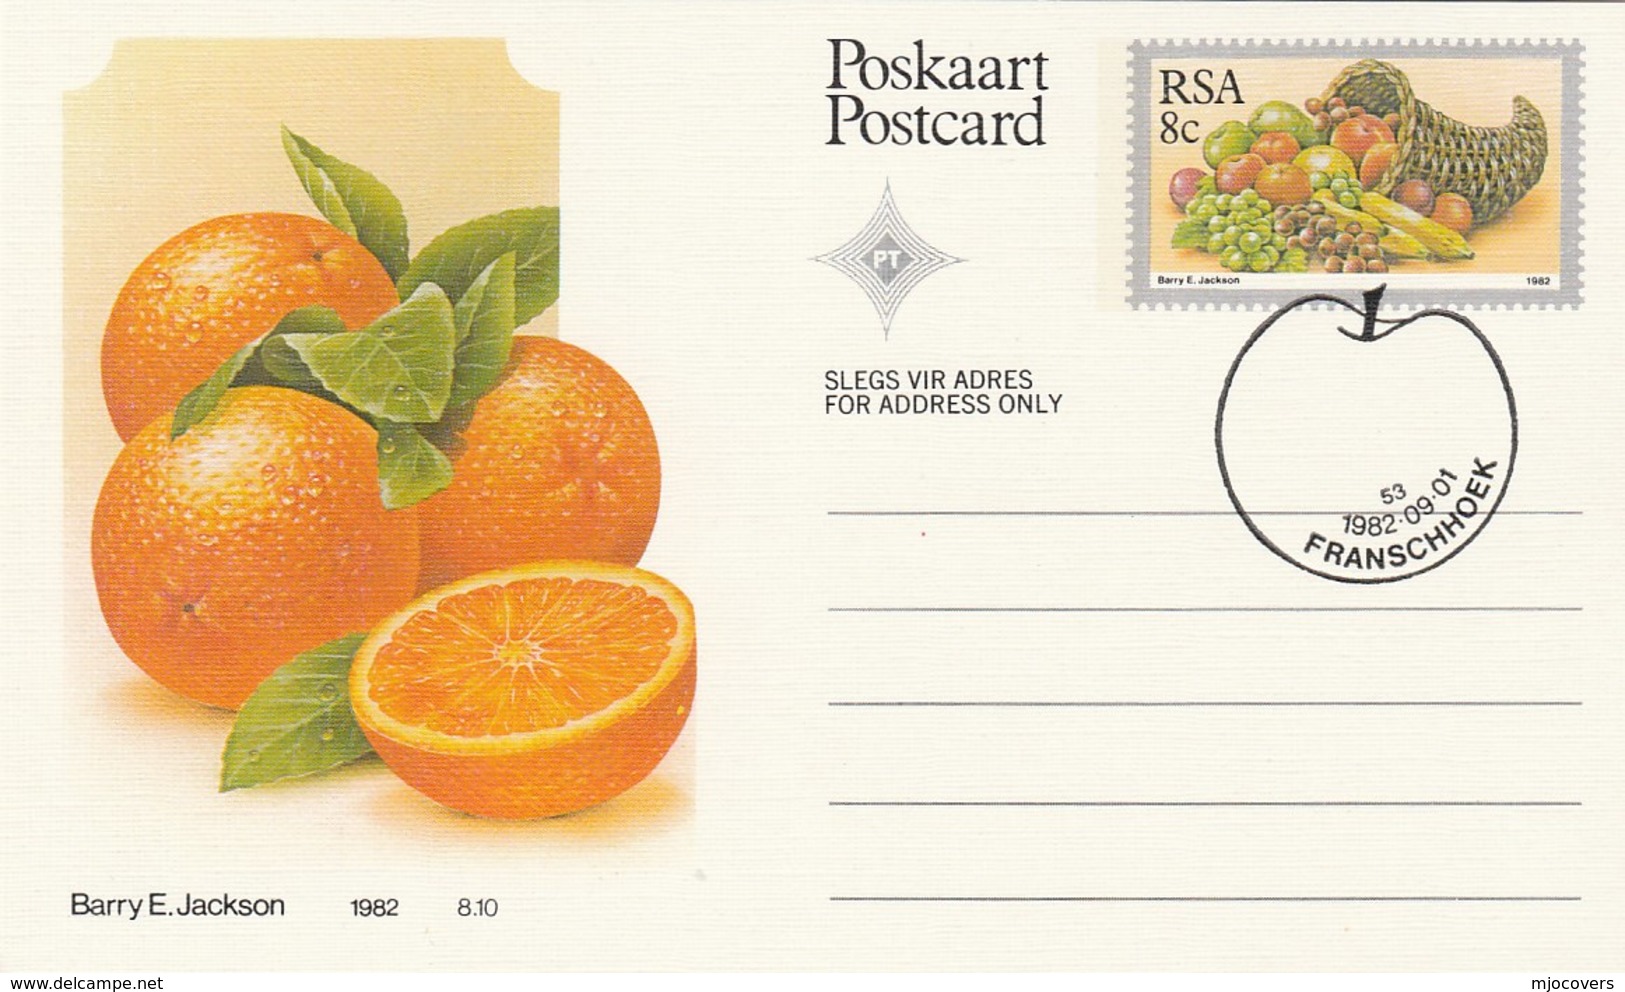 1982 First Day 8c SOUTH AFRICA Postal STATIONERY CARD Illus ORANGES FRUIT Cover Stamps Rsa Grapes  Banana - Fruits